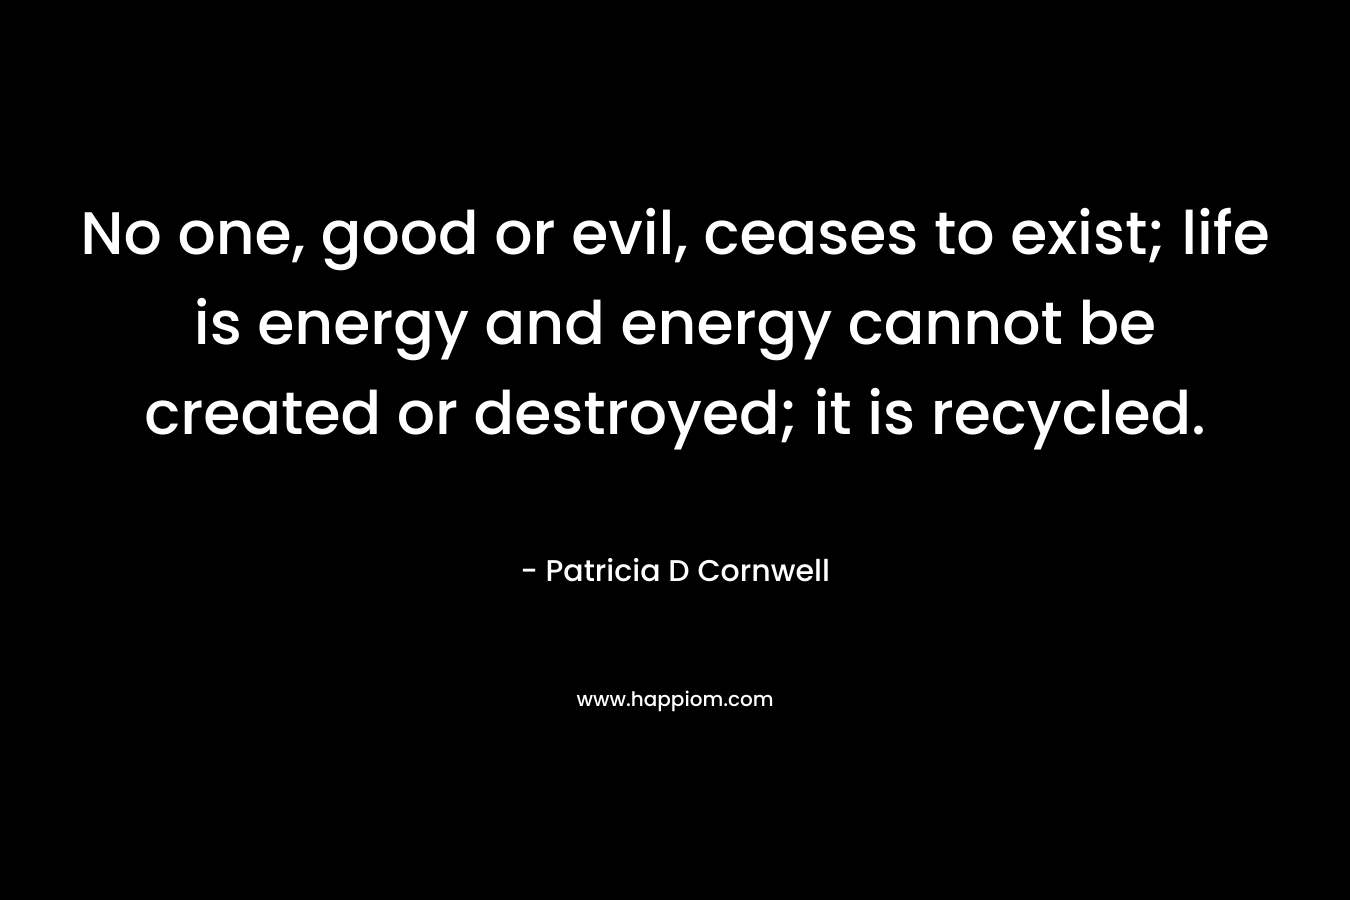 No one, good or evil, ceases to exist; life is energy and energy cannot be created or destroyed; it is recycled. – Patricia D Cornwell